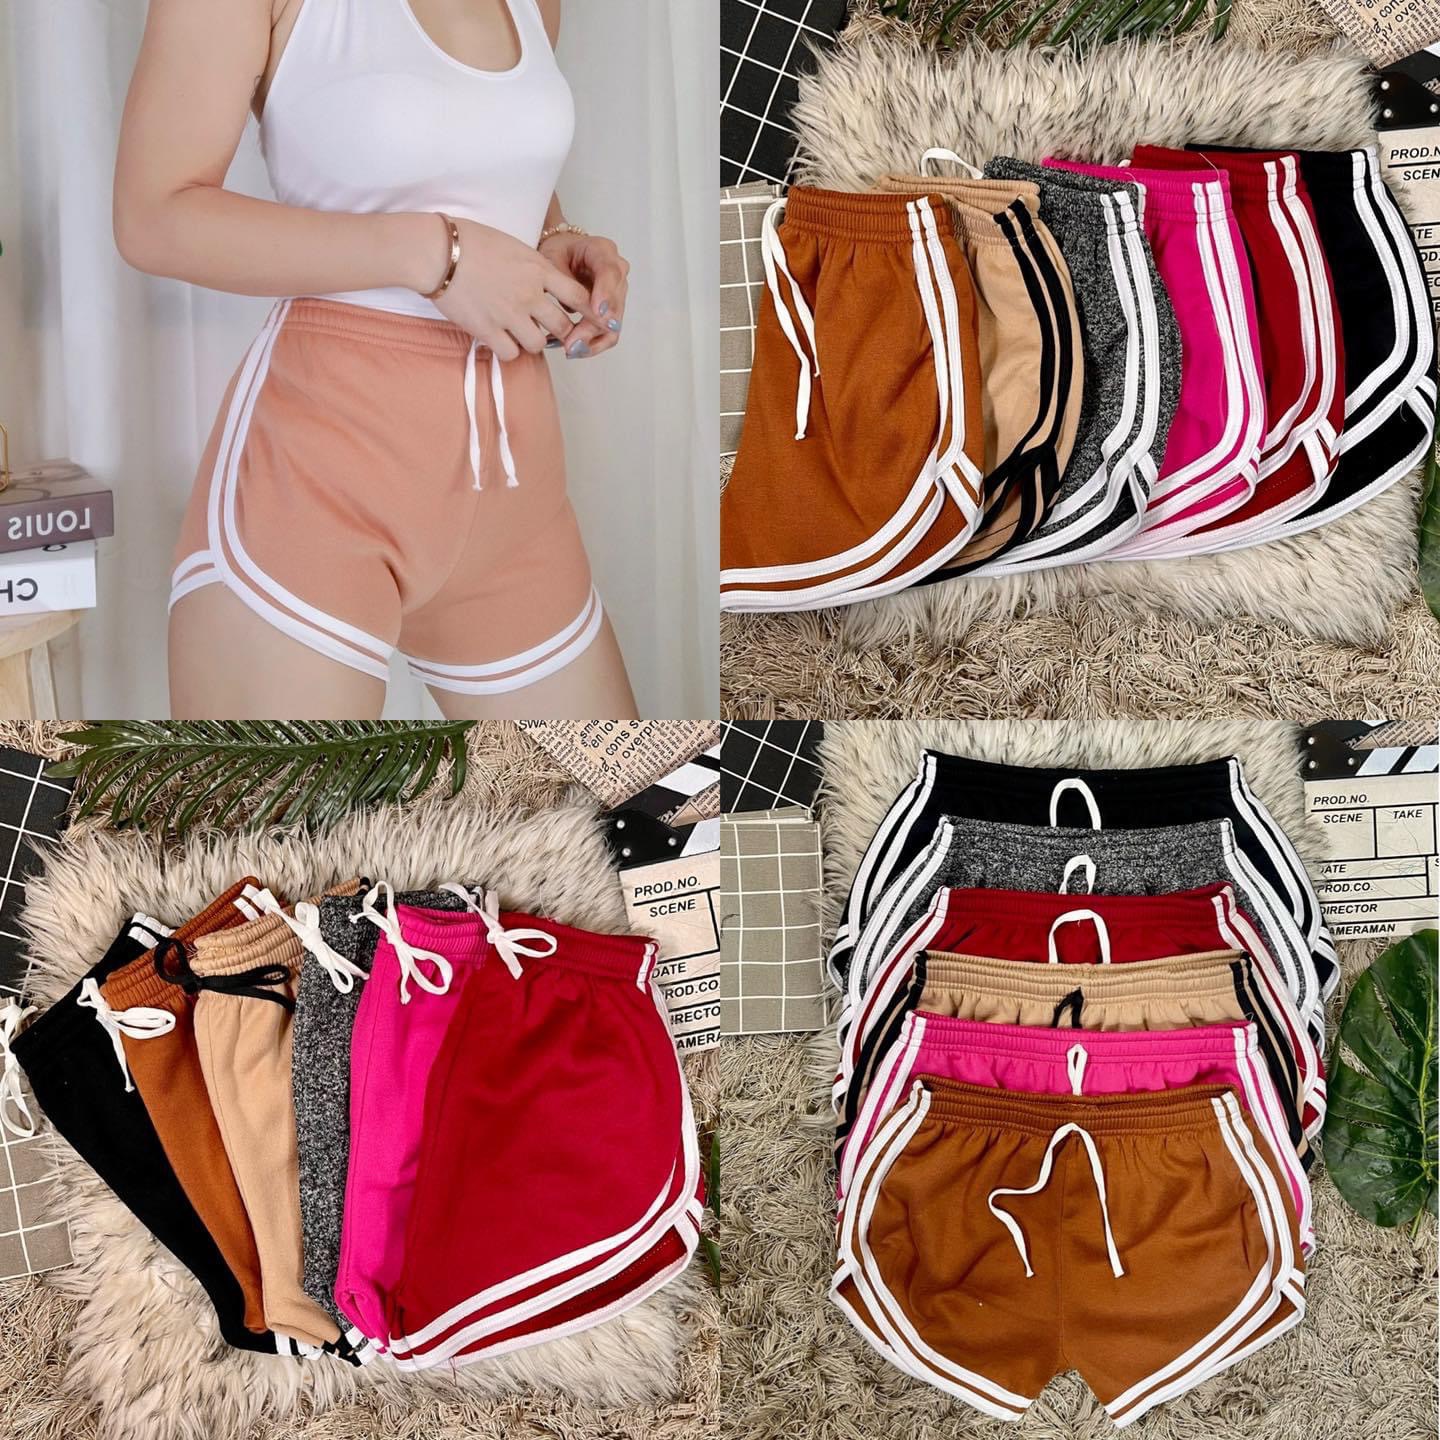 5 PCS. Booty Shorts for ADULT